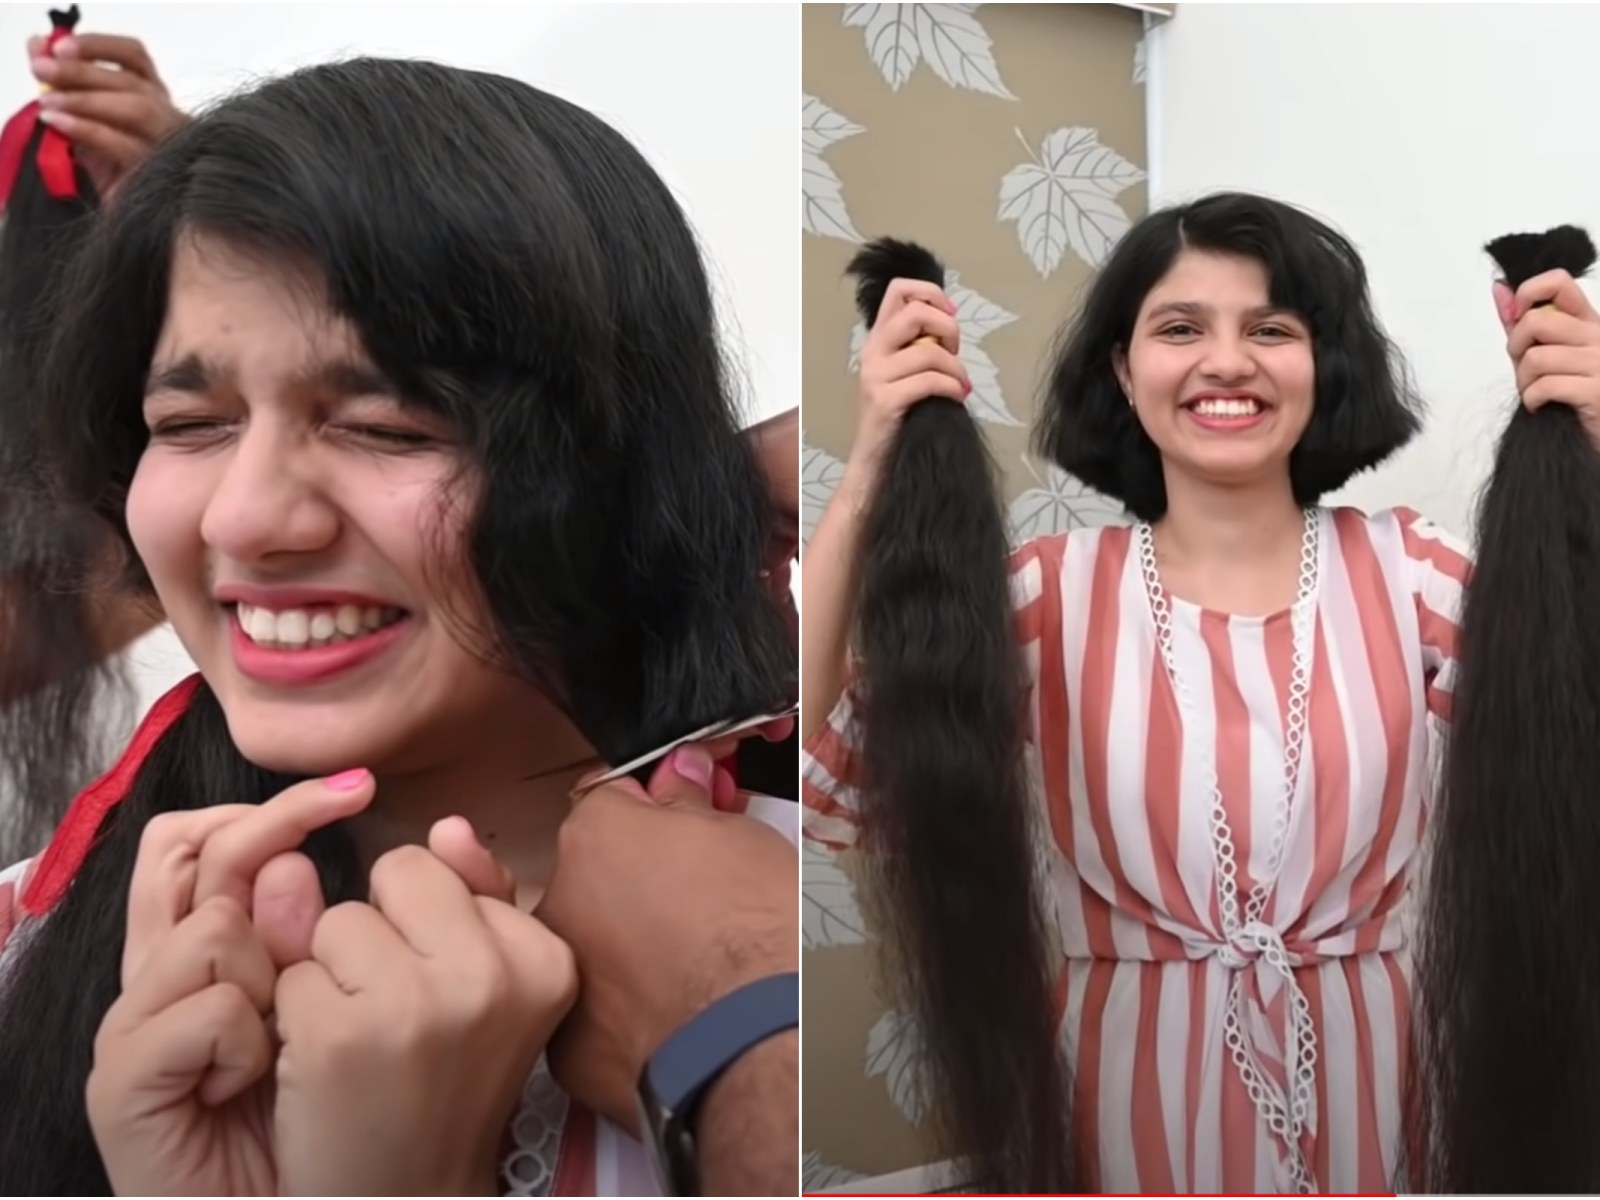 Teenage Rapunzel With World's Longest Hair at Over 6ft Finally Gets It Cut  After 12 Years